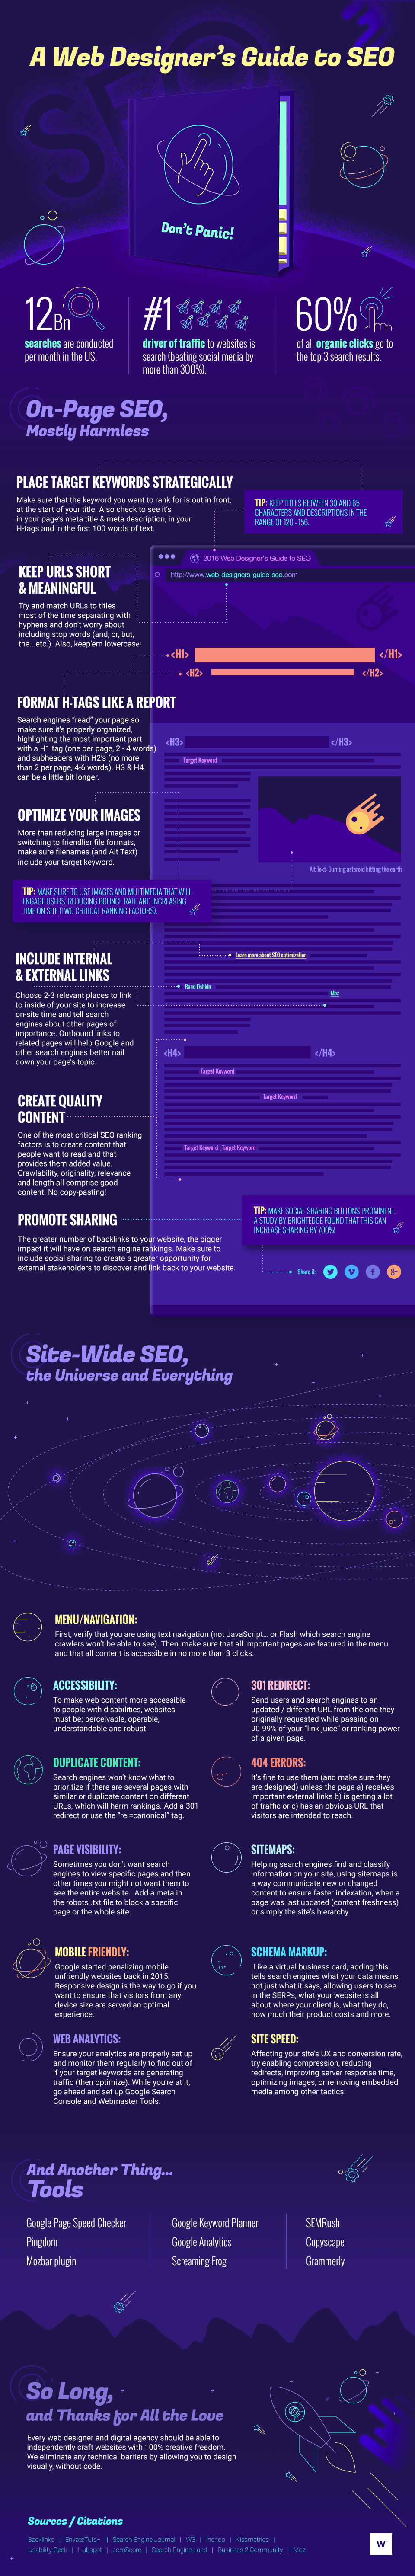 A Web Designer's Guide to SEO Infographic